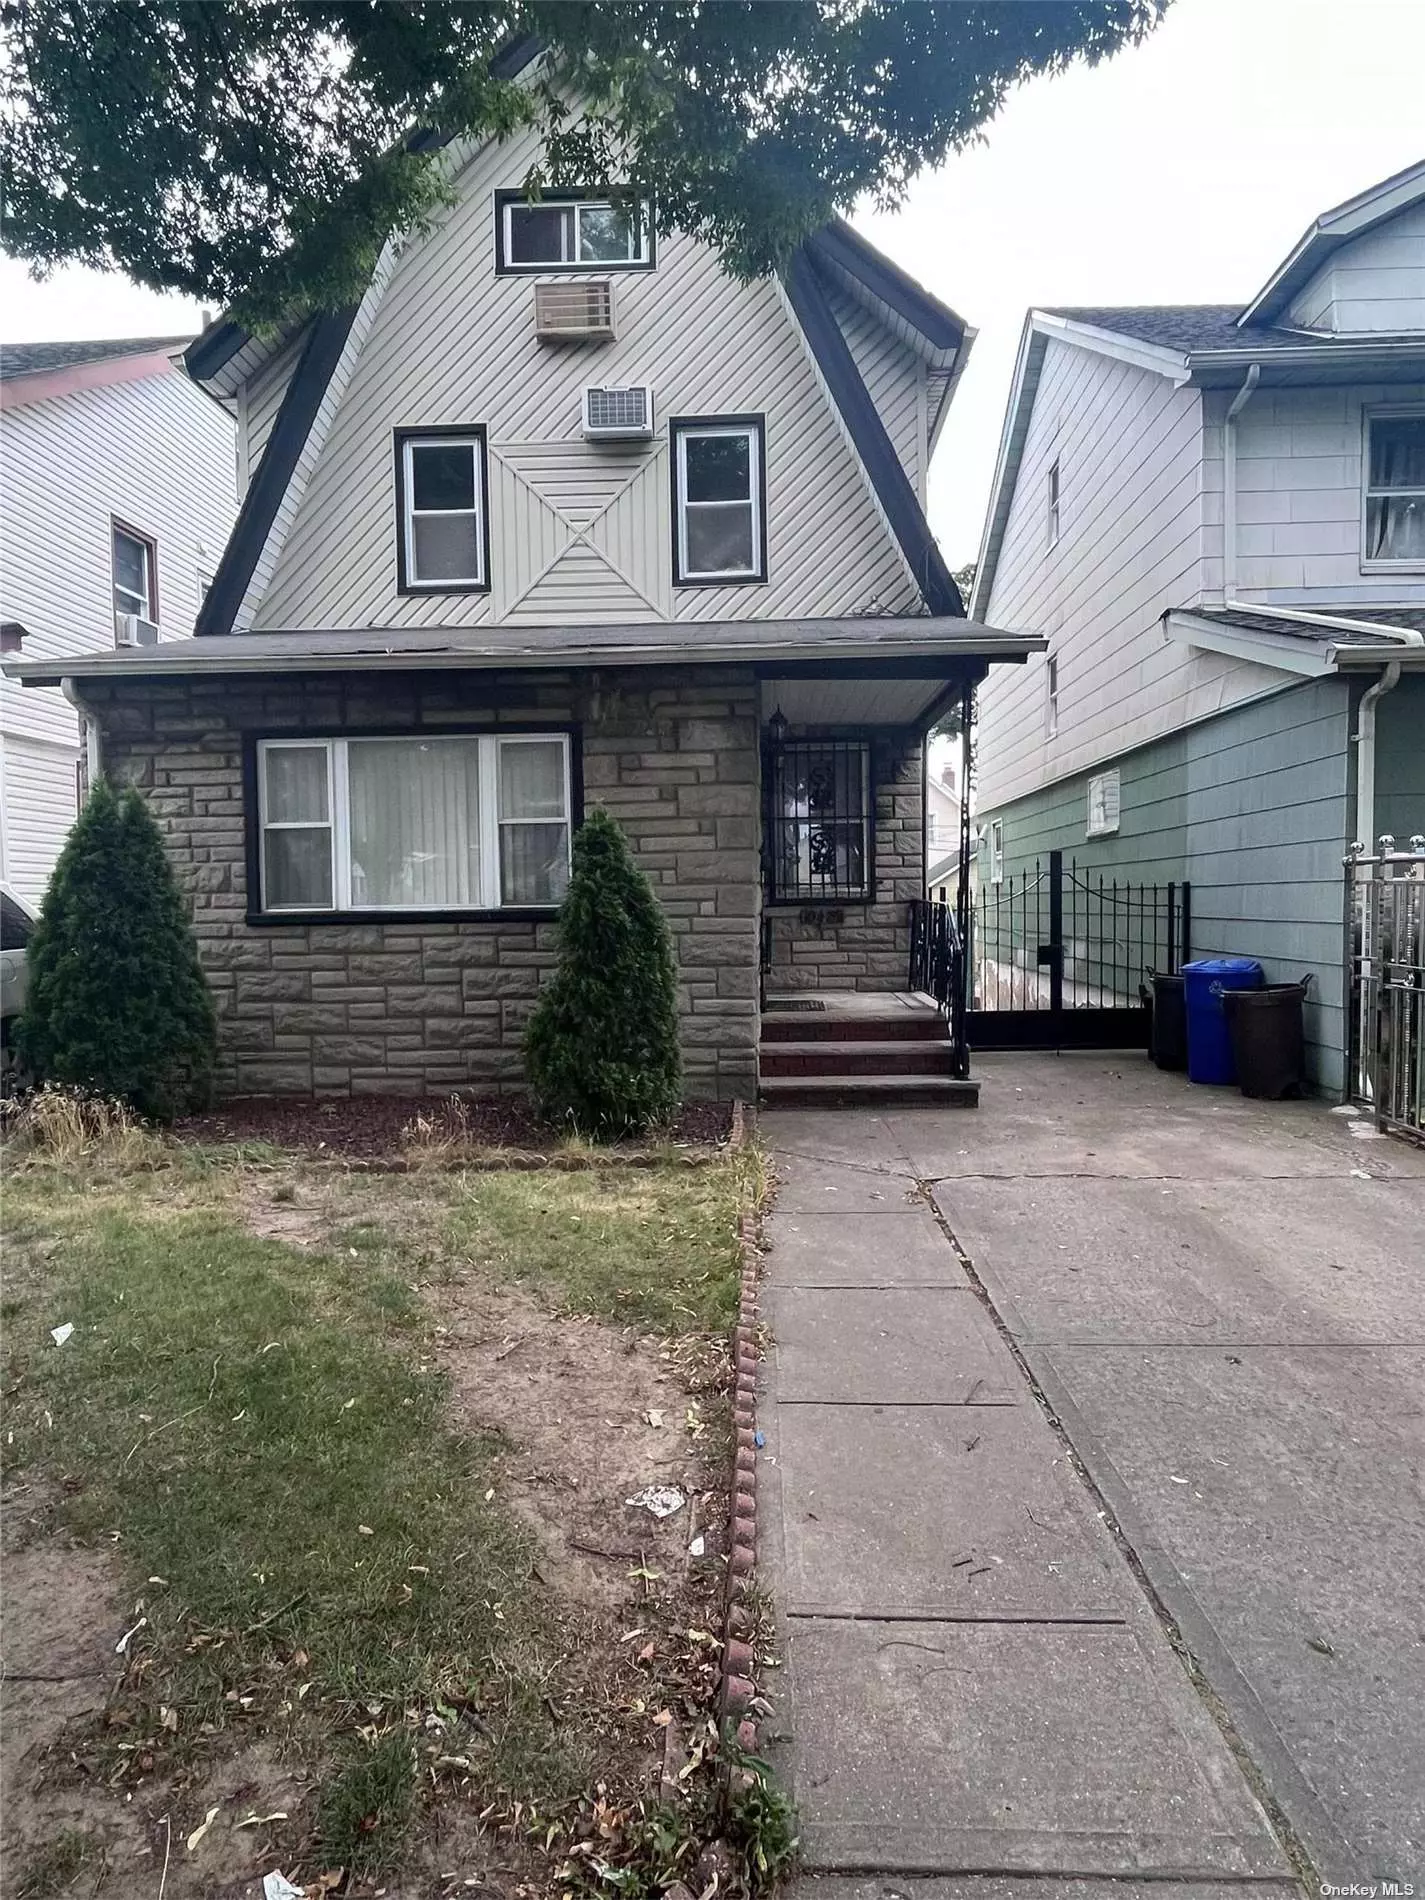 Beautiful 1 family home ready to move in. Close to restaurants, transportation and to Liberty Ave. 5 bedrooms, 2 and a half bathrooms. Cozy environment to move in.